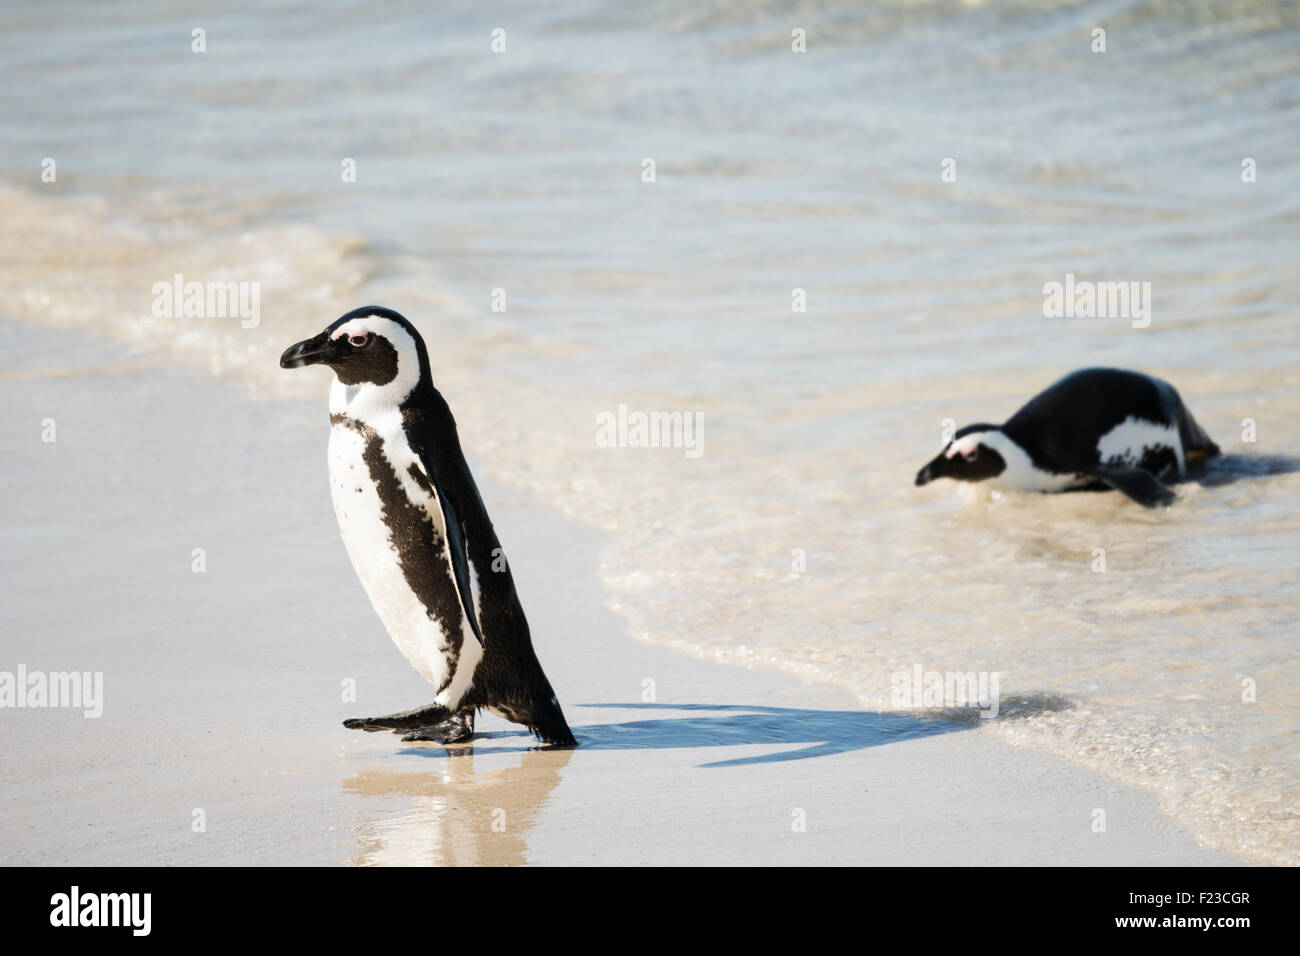 Two African Penguins (Jackass Penguins) emerge from the ocean, Boulders Beach National Park, Simonstown, South Africa Stock Photo